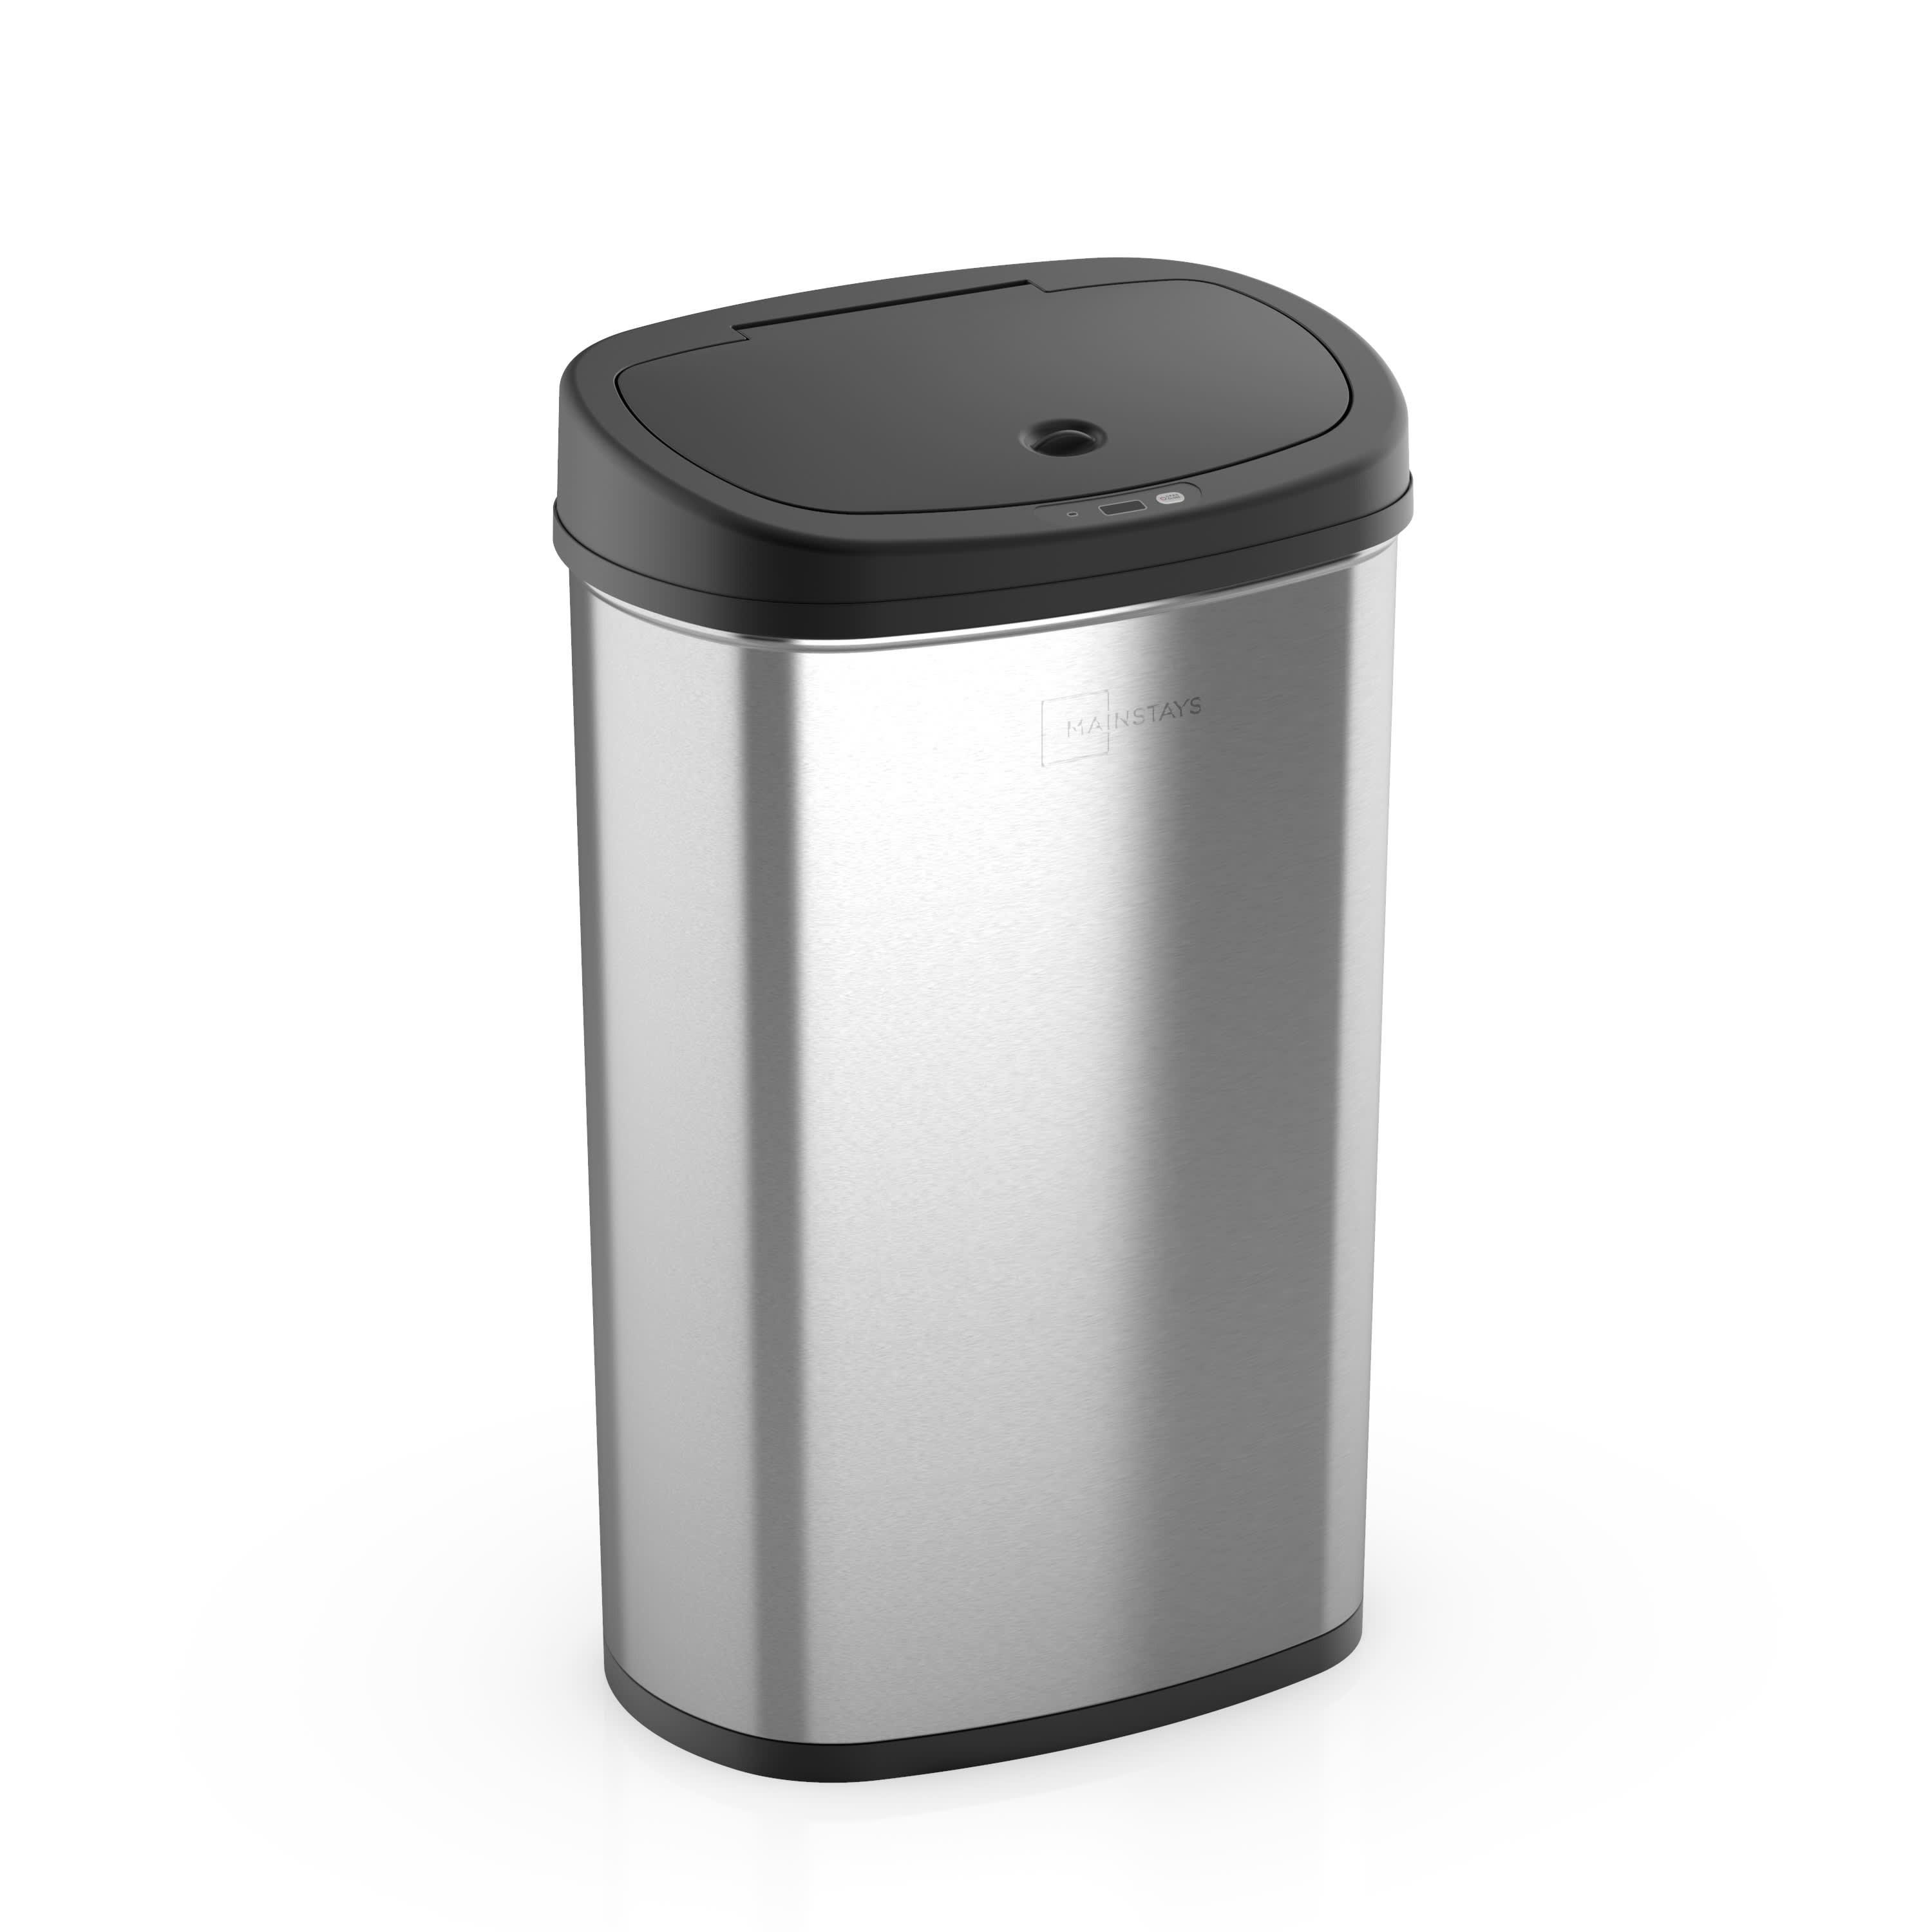 The 7 Best Bathroom Trash Cans of 2022 - PureWow